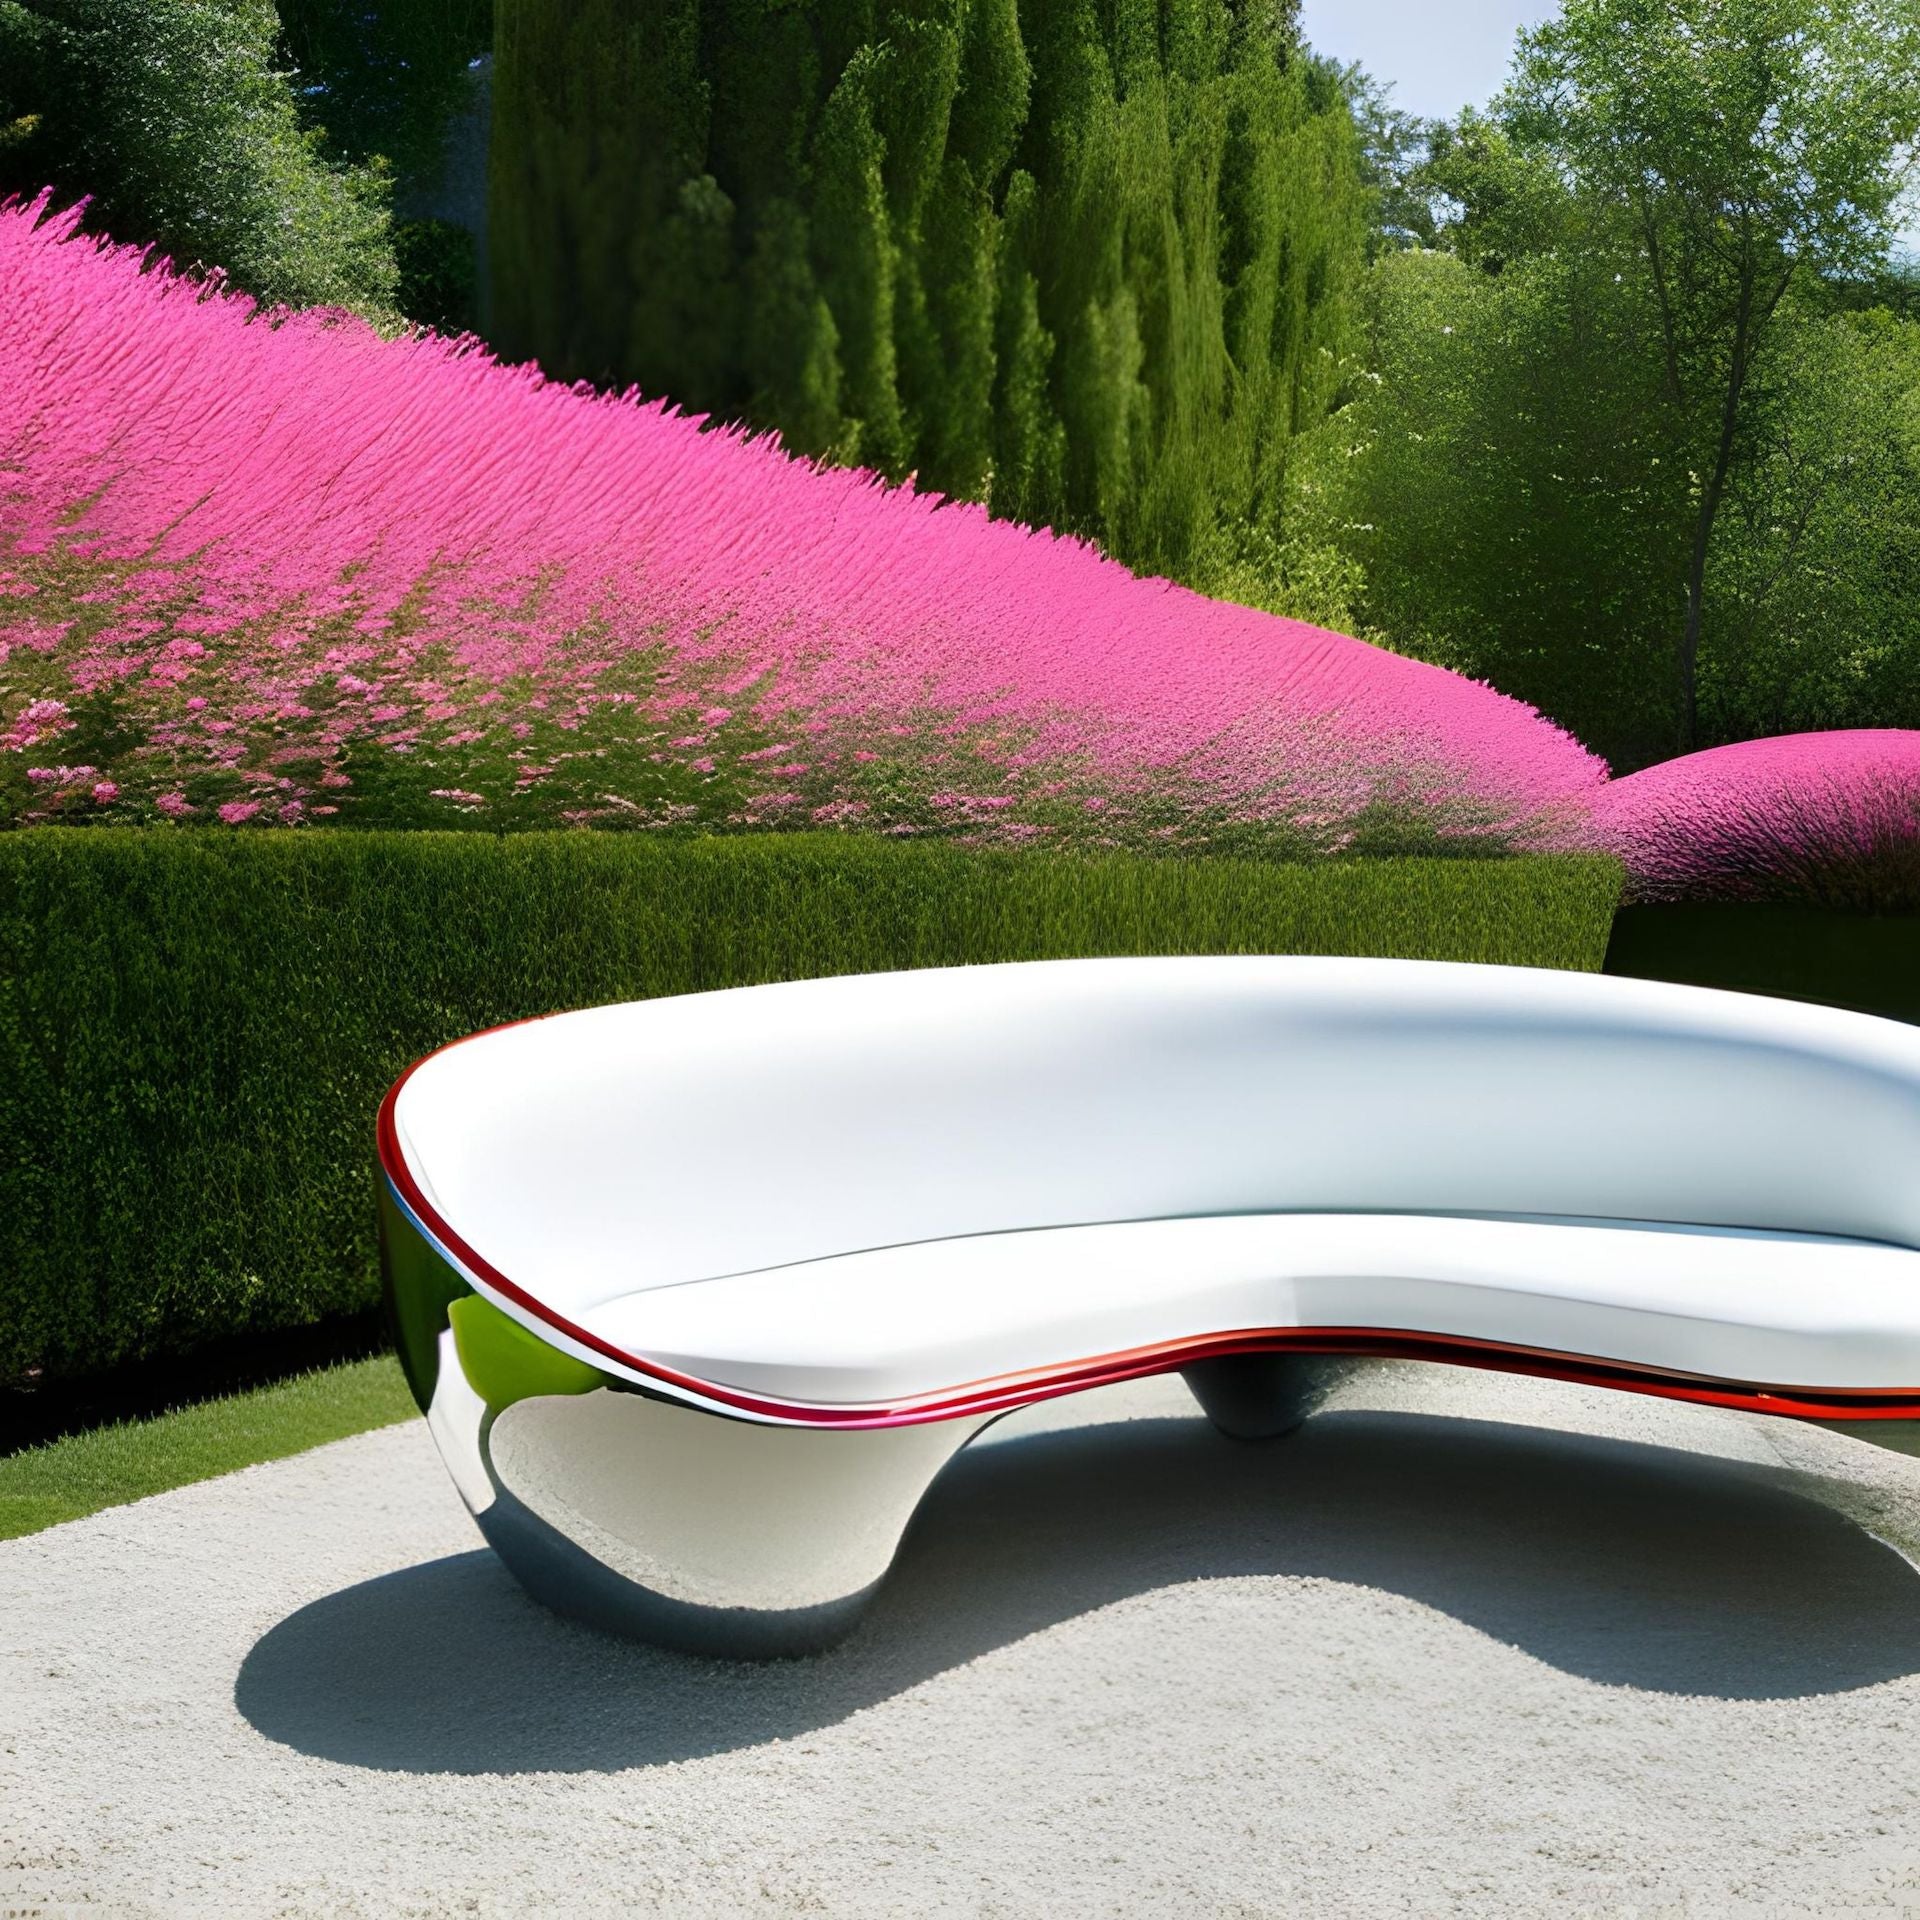 AI-generated image from prompt: "Lockheed Lounge by Marc Newson in a garden." Via Canva